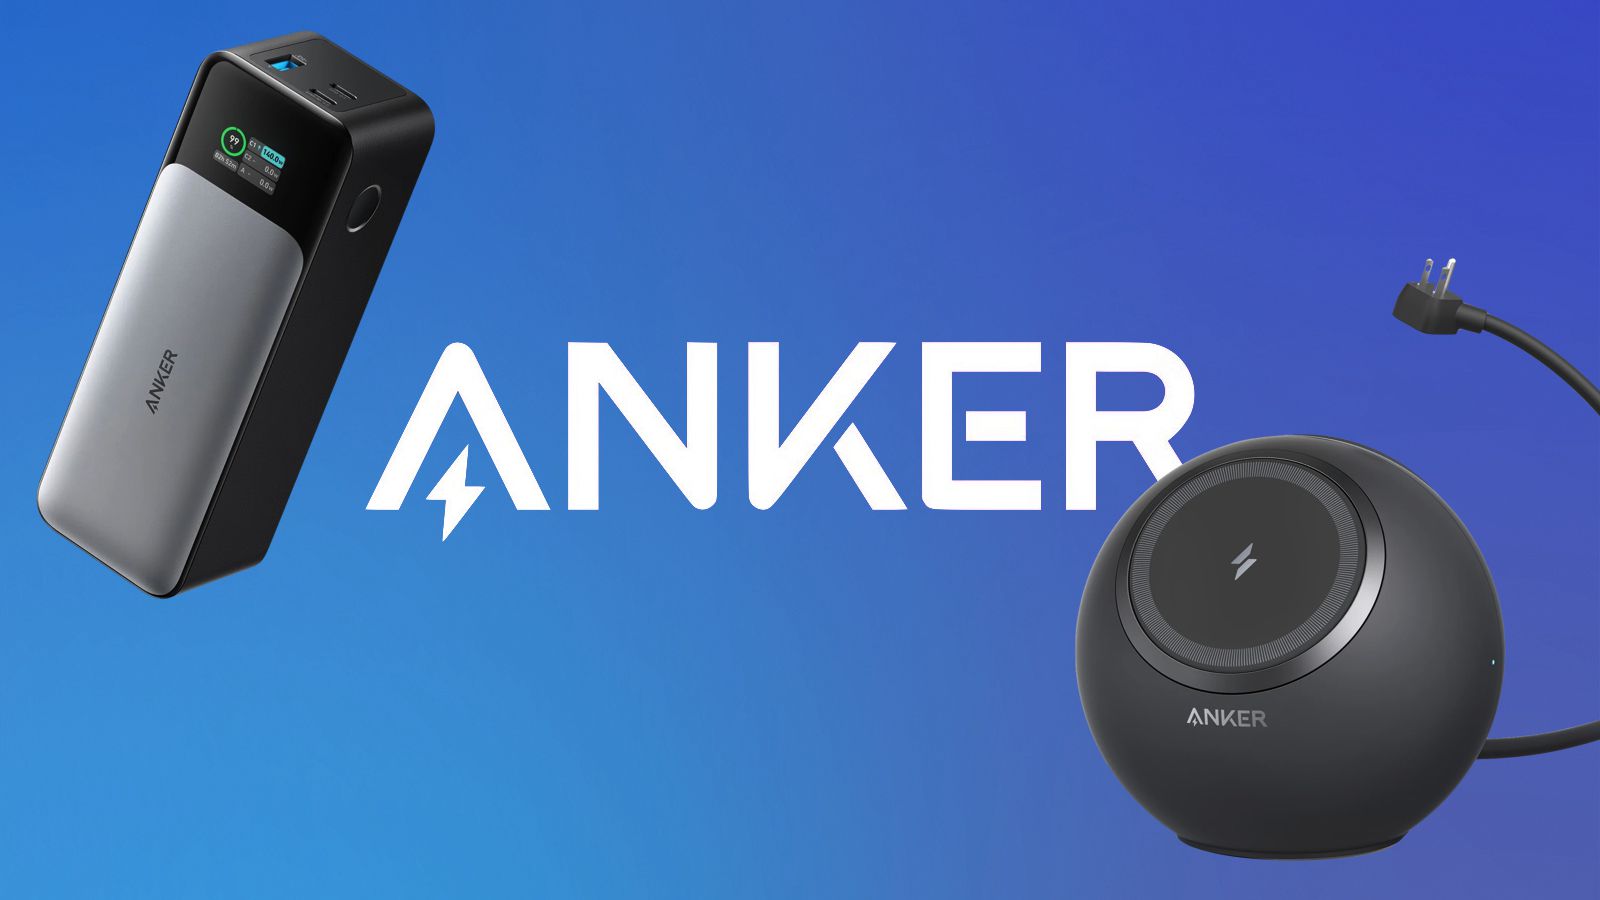 Deals: Anker's Spring Sale Has Up to 30% Off Portable Batteries, USB-C Chargers, and More - macrumors.com